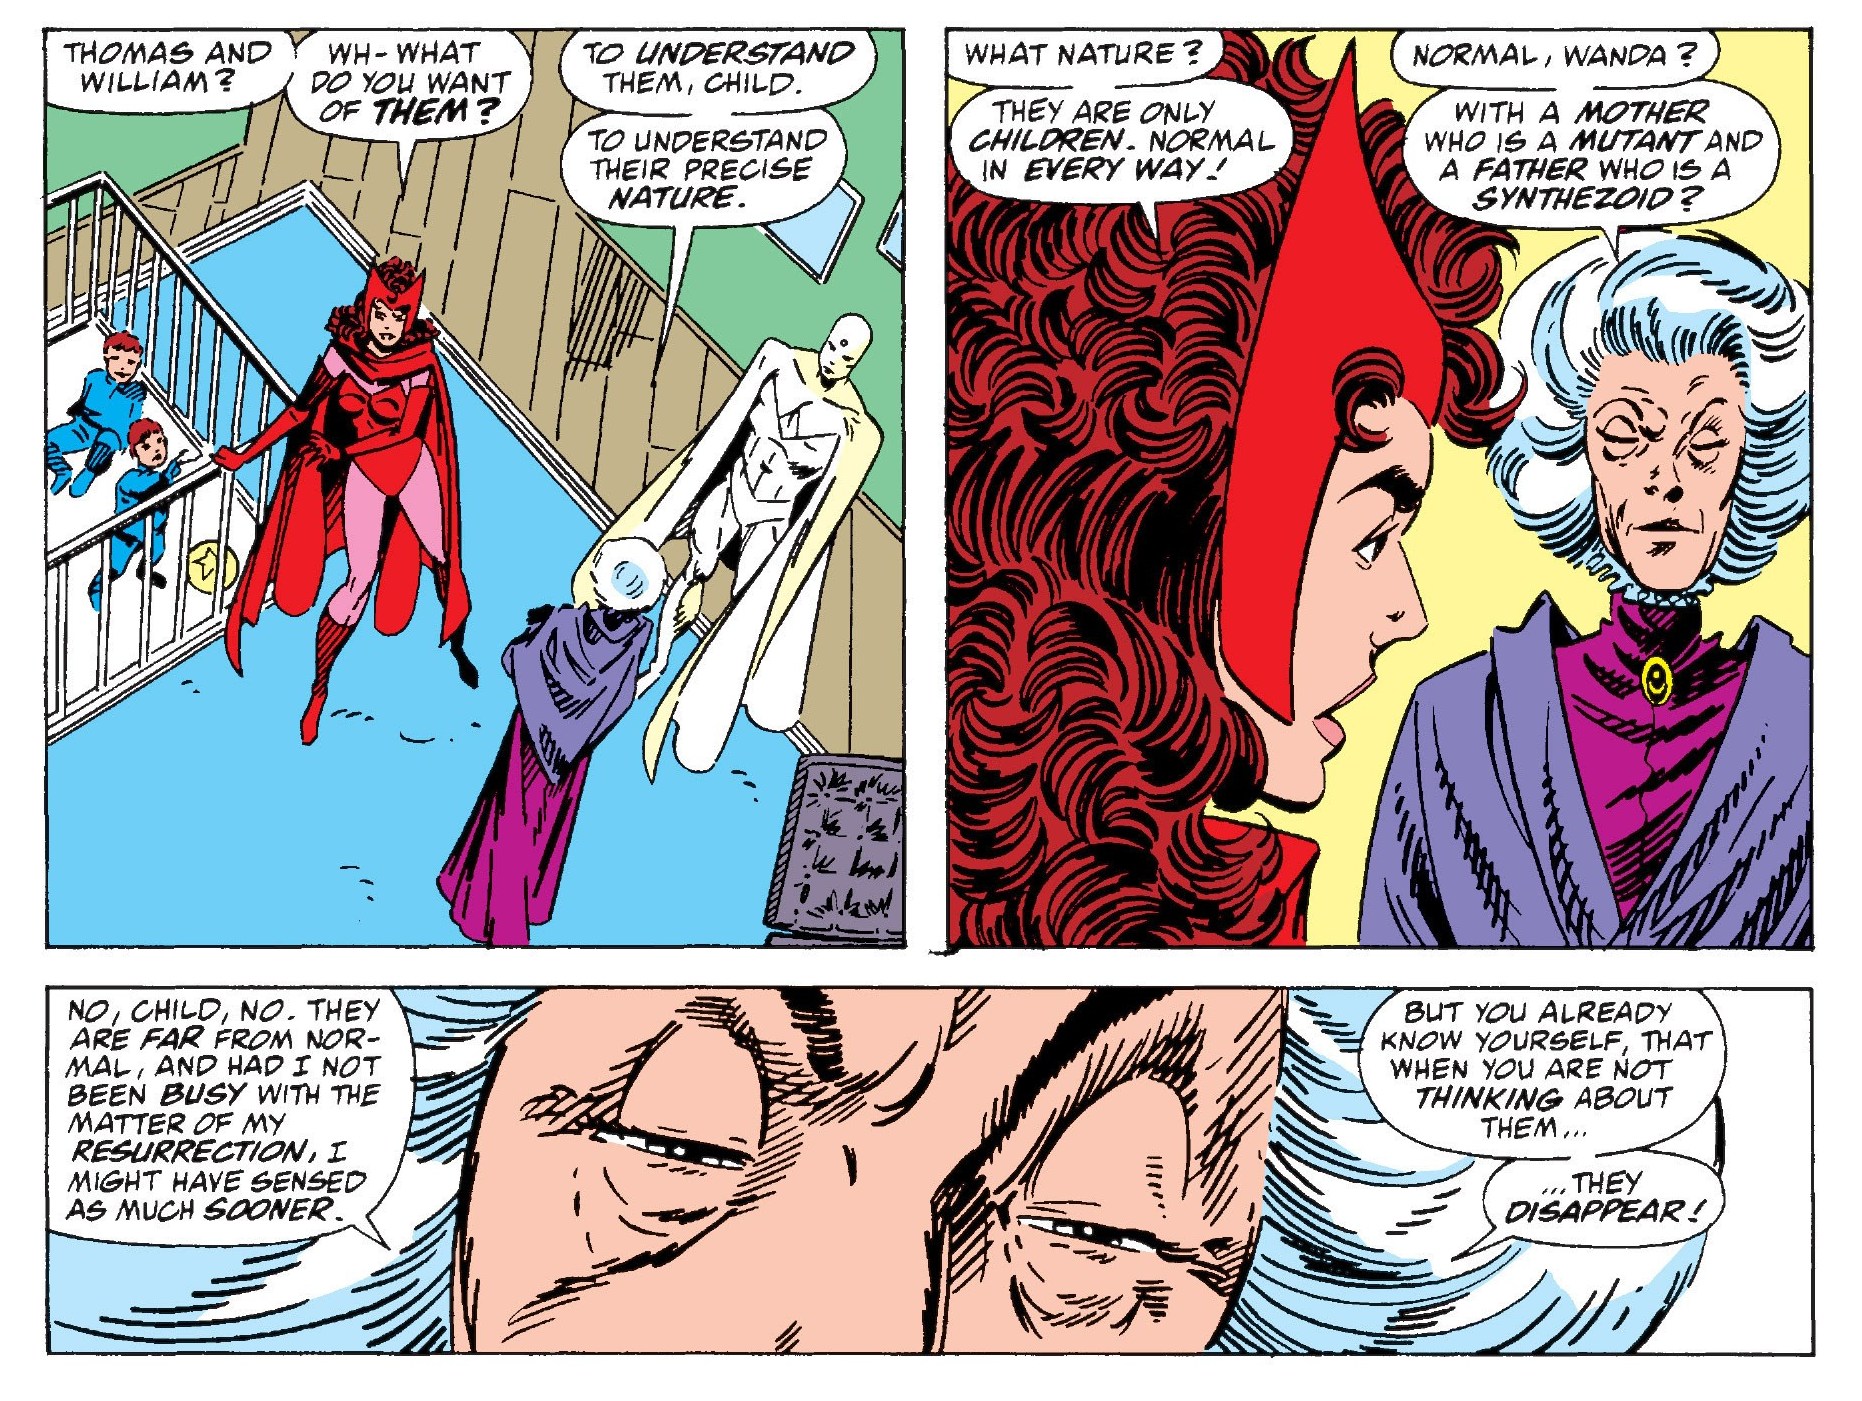 Agatha Harkness telling Wanda that her children are not as they seem. (Image: Mike Machlan, Bill Oakley, Bob Sharen/Marvel)